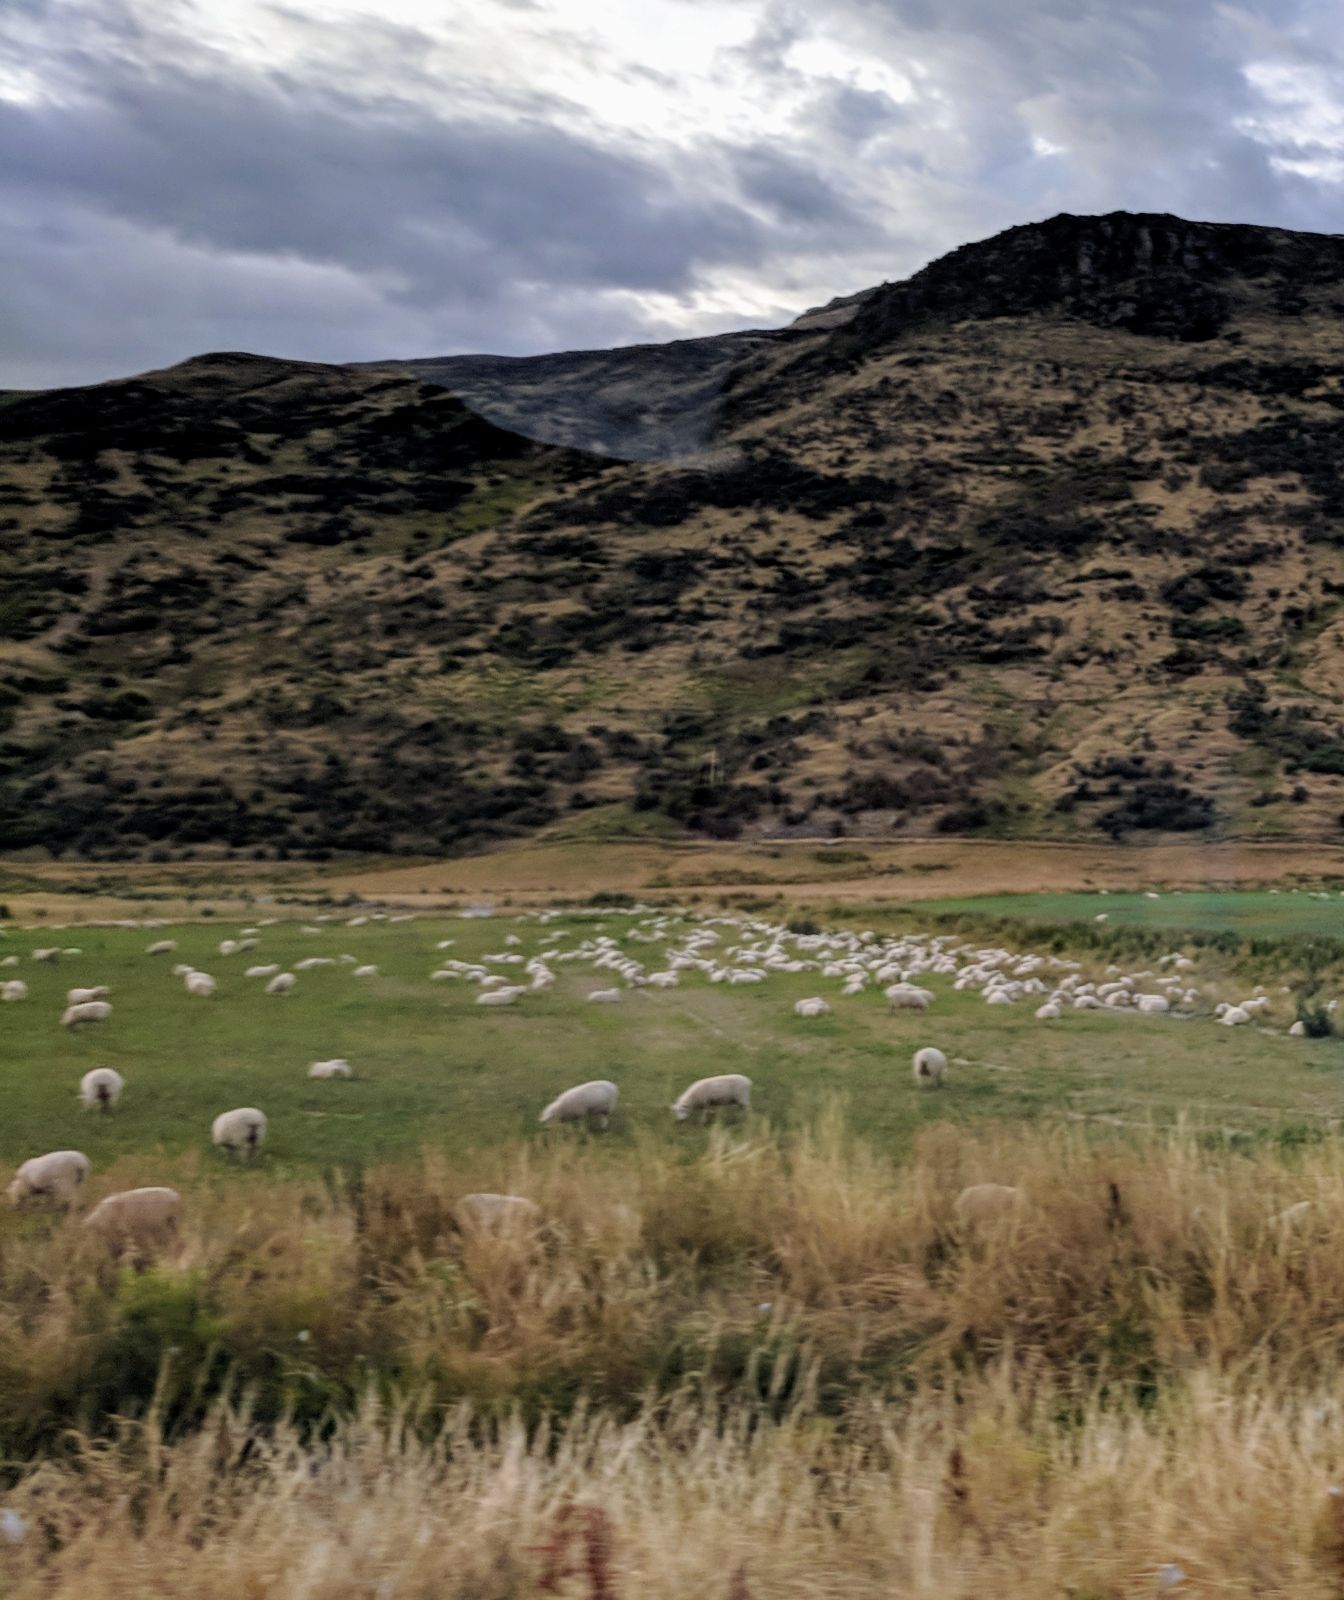 155--back to the land of the sheep on way to Te Anau